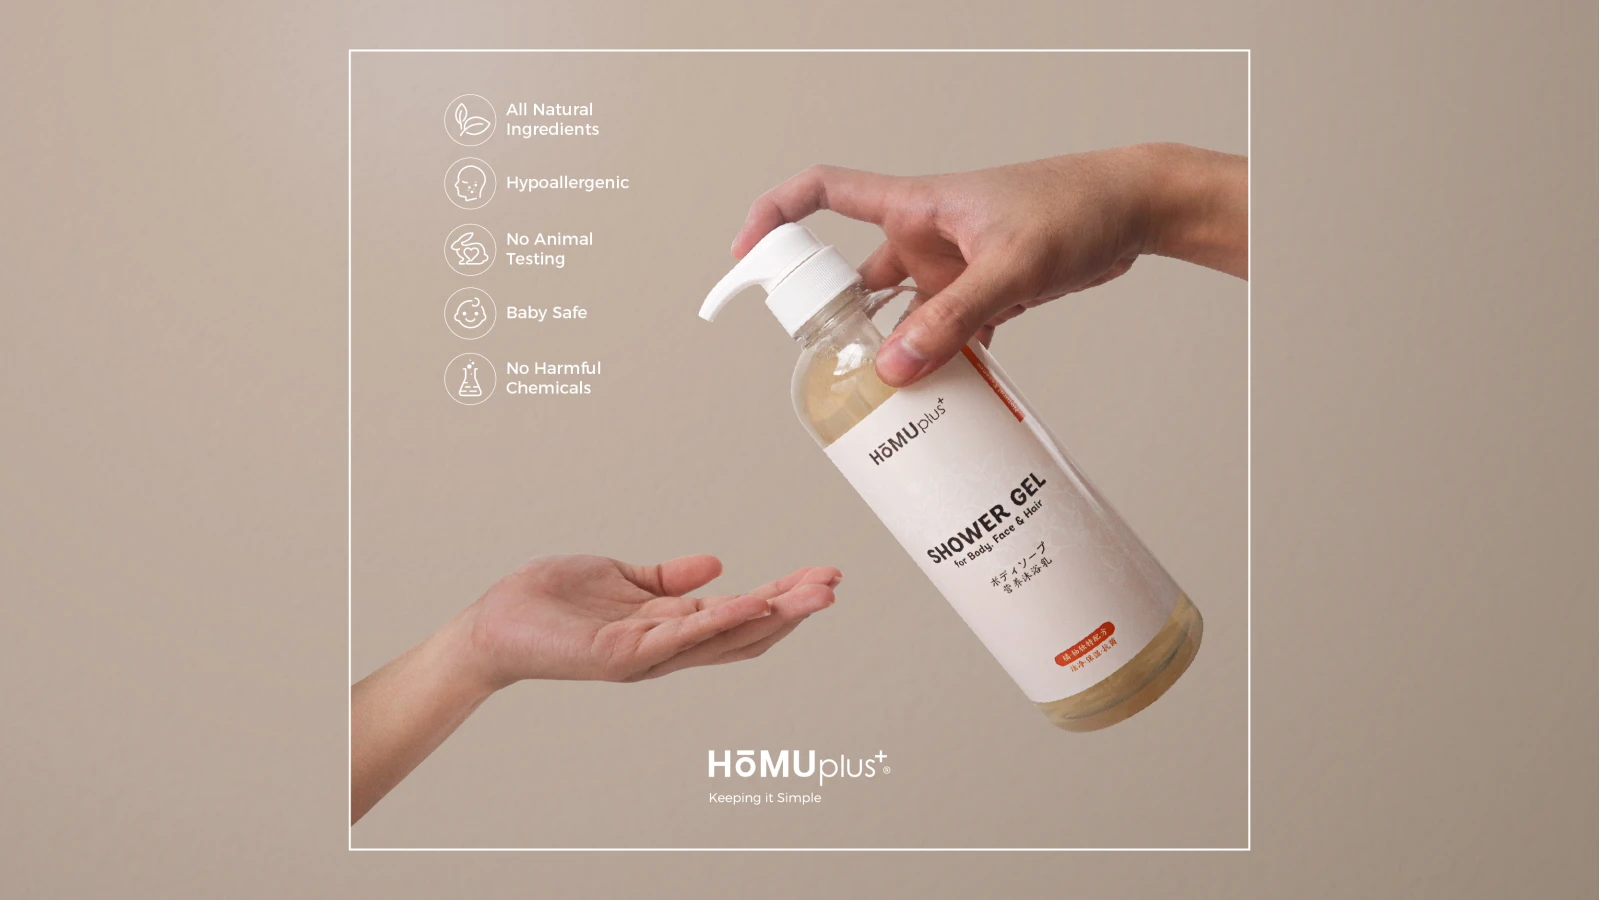 Here’s What You Need To Know About The HōMUplus+ Shower Gel